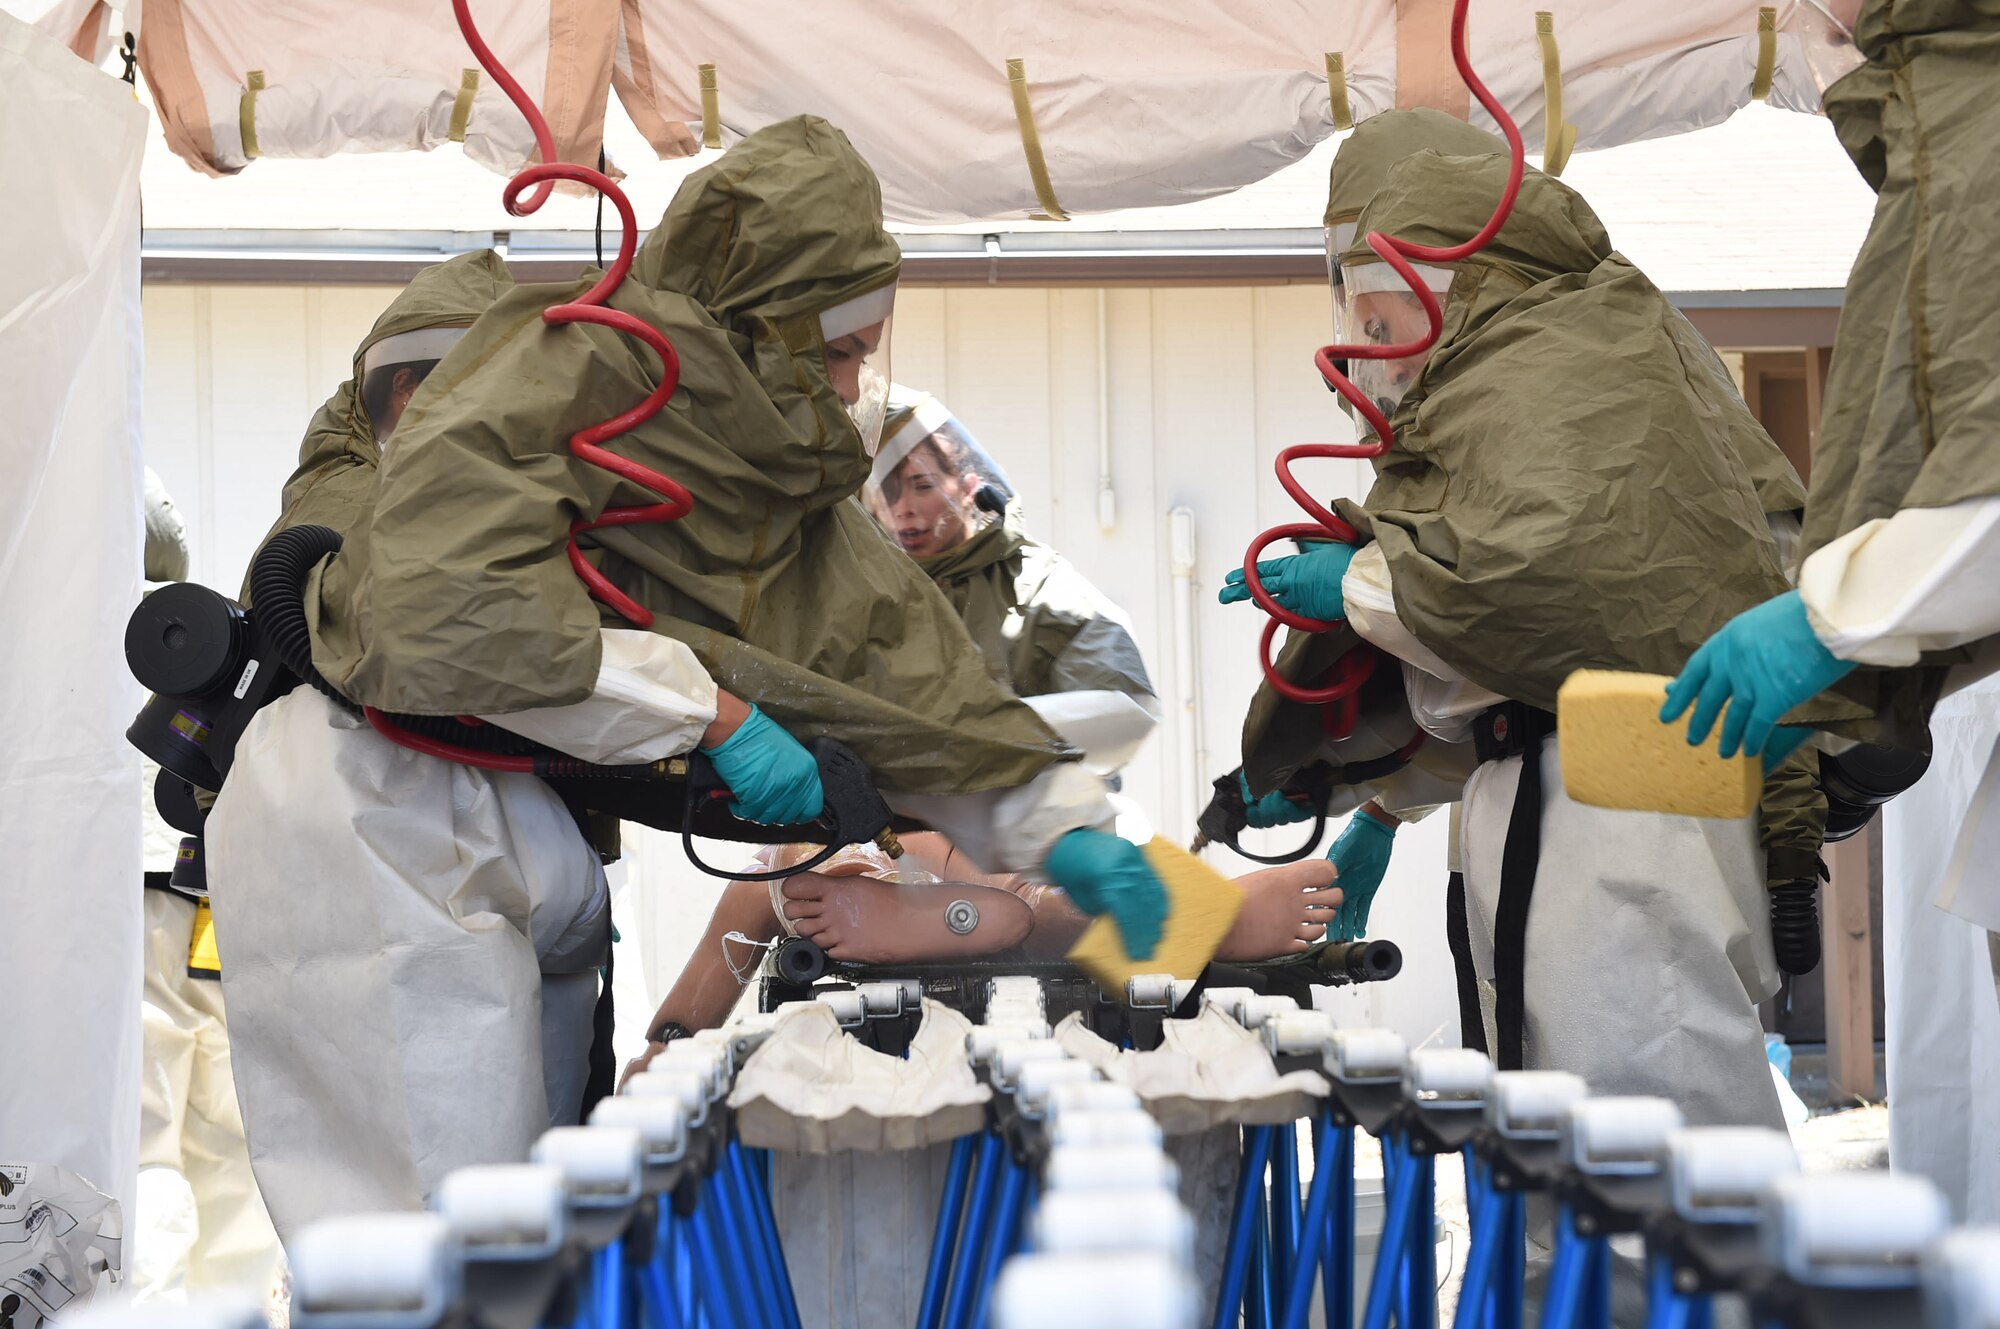 Disaster response team members move simulated patients through a decontamination station during a July 13, 2016 exercise at Camp Bramble on Joint Base San Antonio-Lackland, Texas. The exercise simulated an aircraft crash designed to test the medics’ response skills in the event of a similar real-world incident. (U.S. Air Force photo/Staff Sgt. Jerilyn Quintanilla)